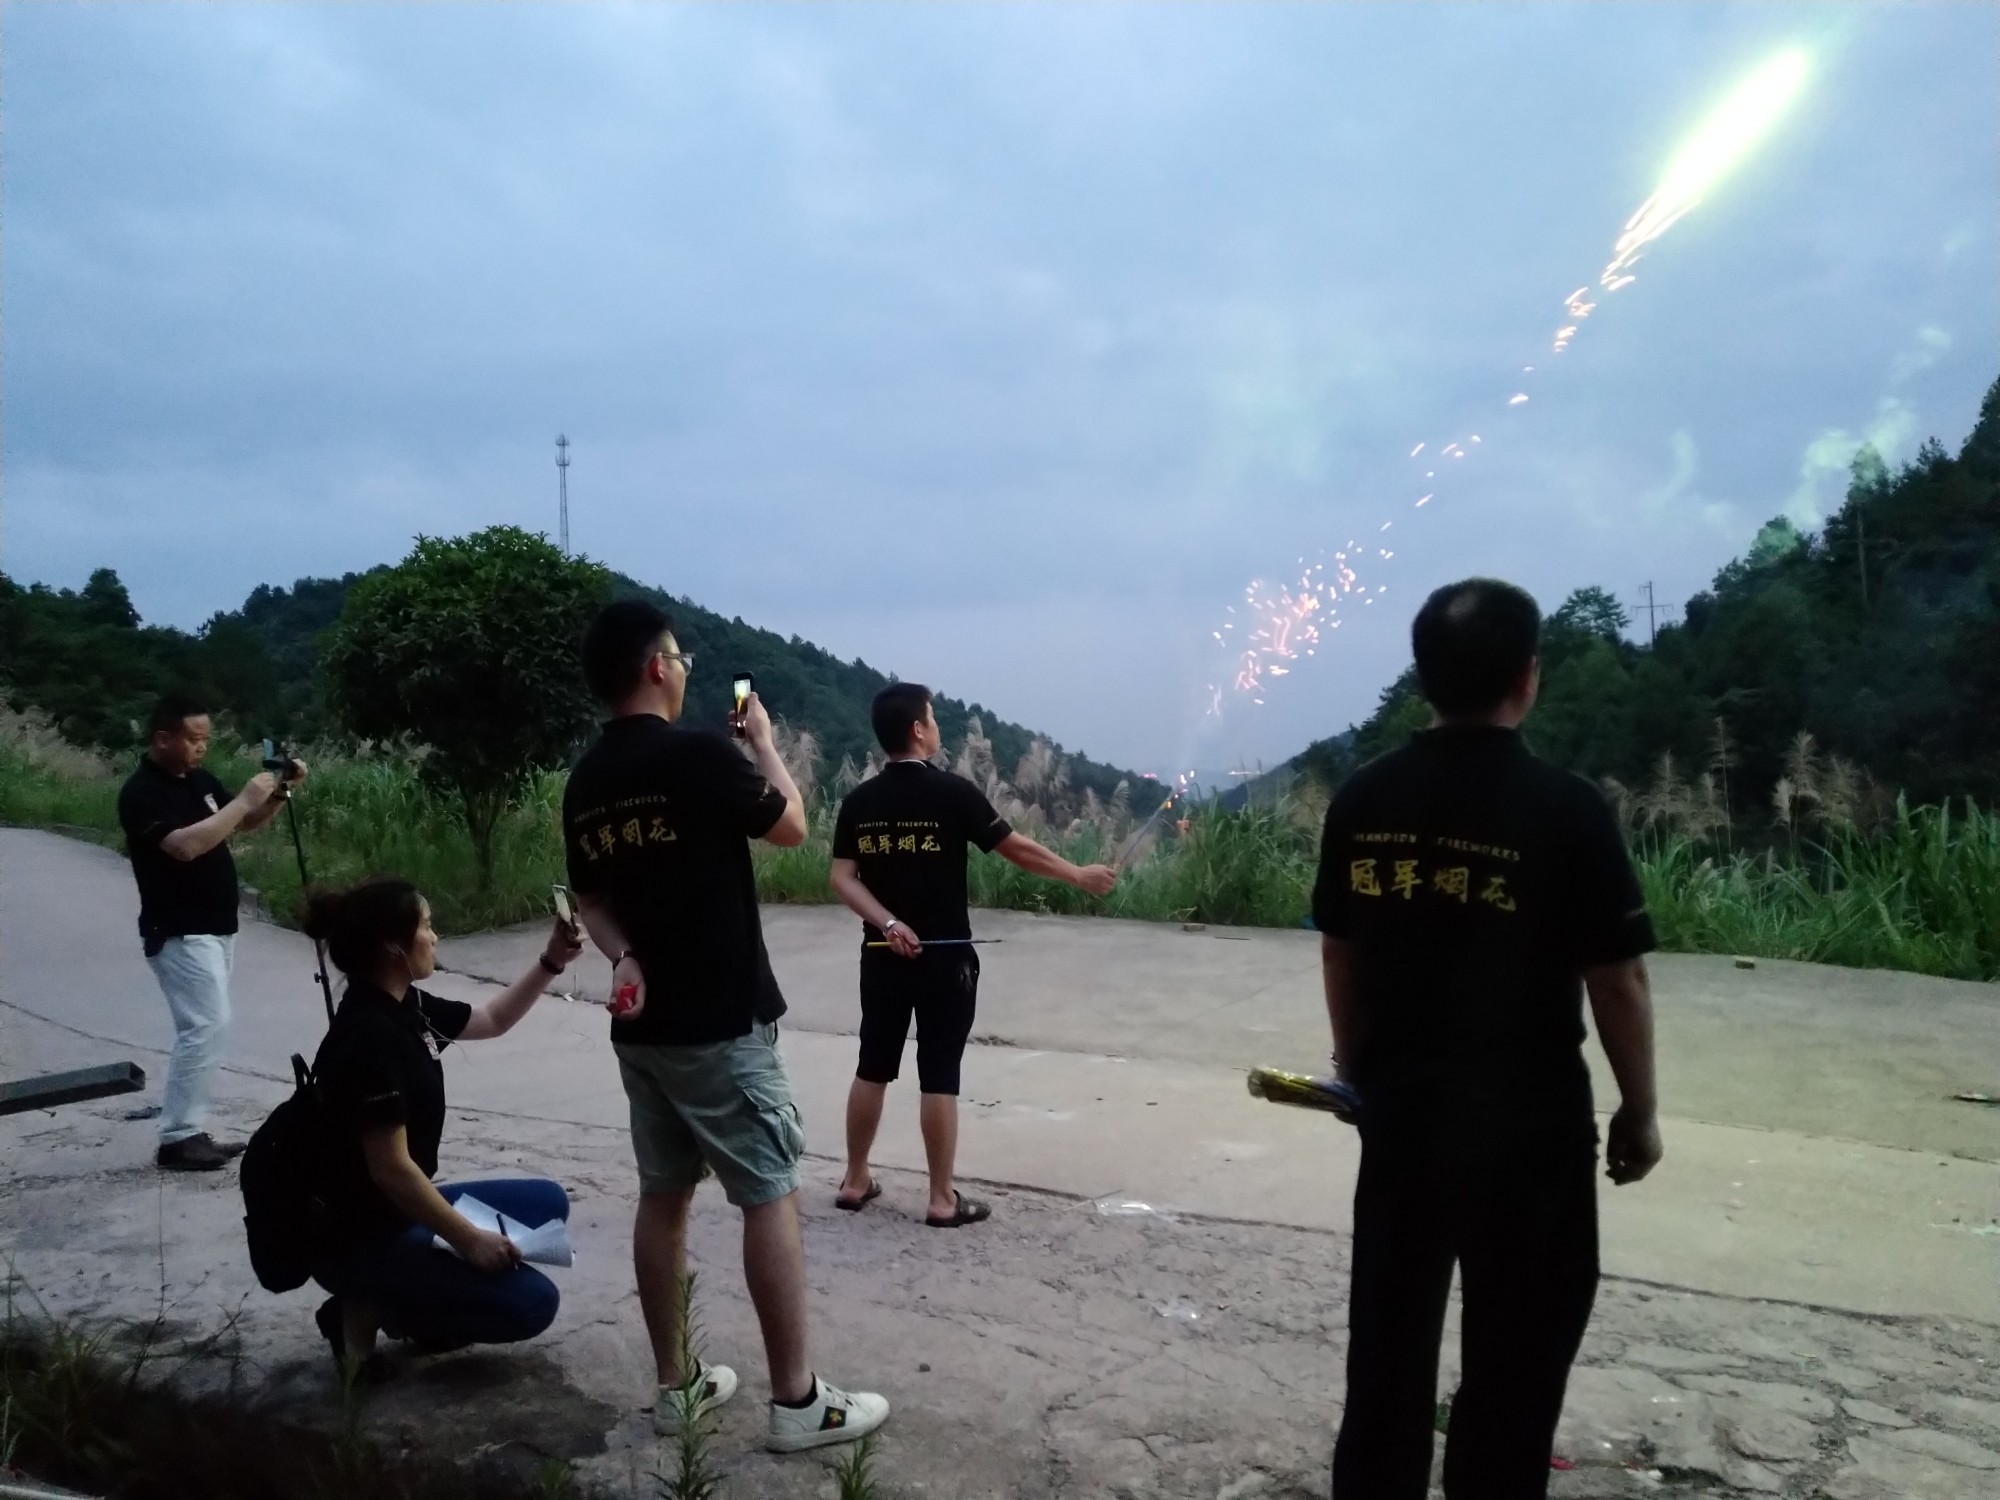 Live video of fireworks sample testing for Malaysia customer